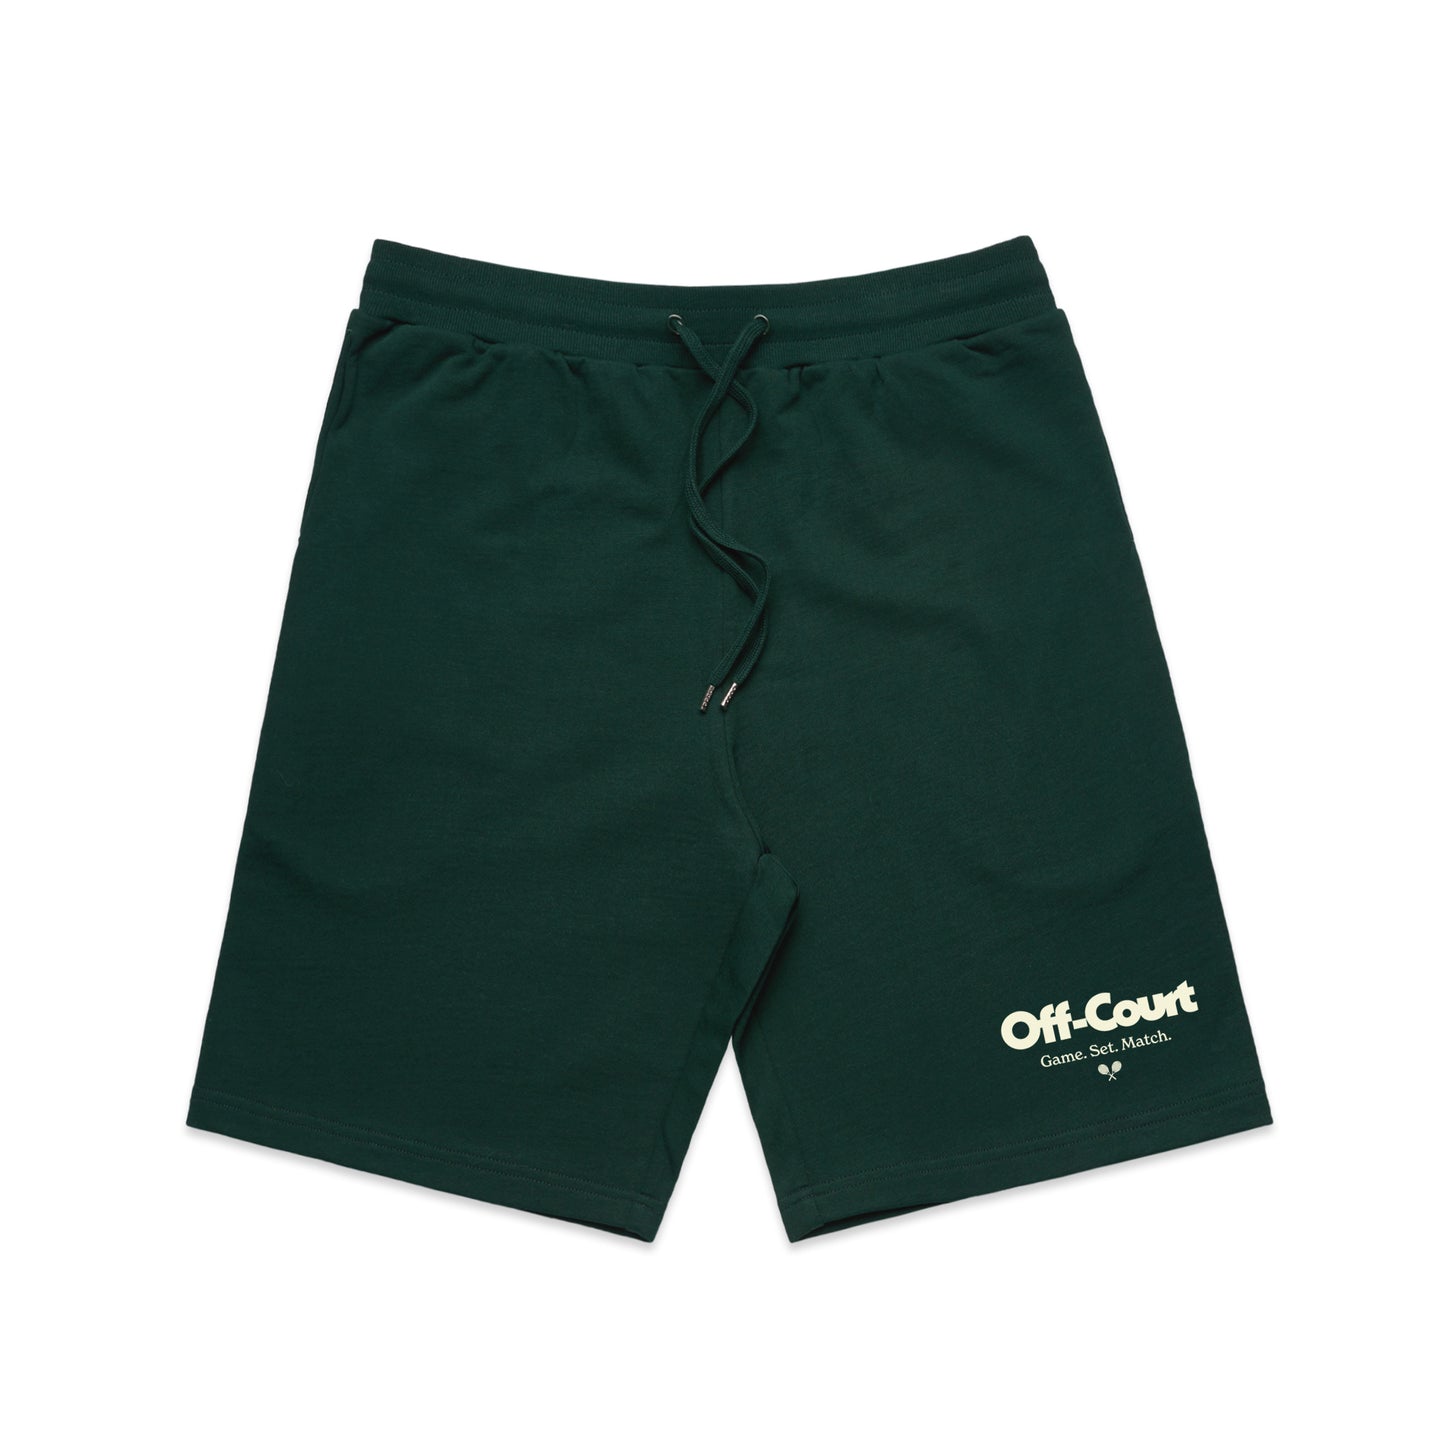 Vice 84 'Off Court GSM' Jogger Shorts - Pine